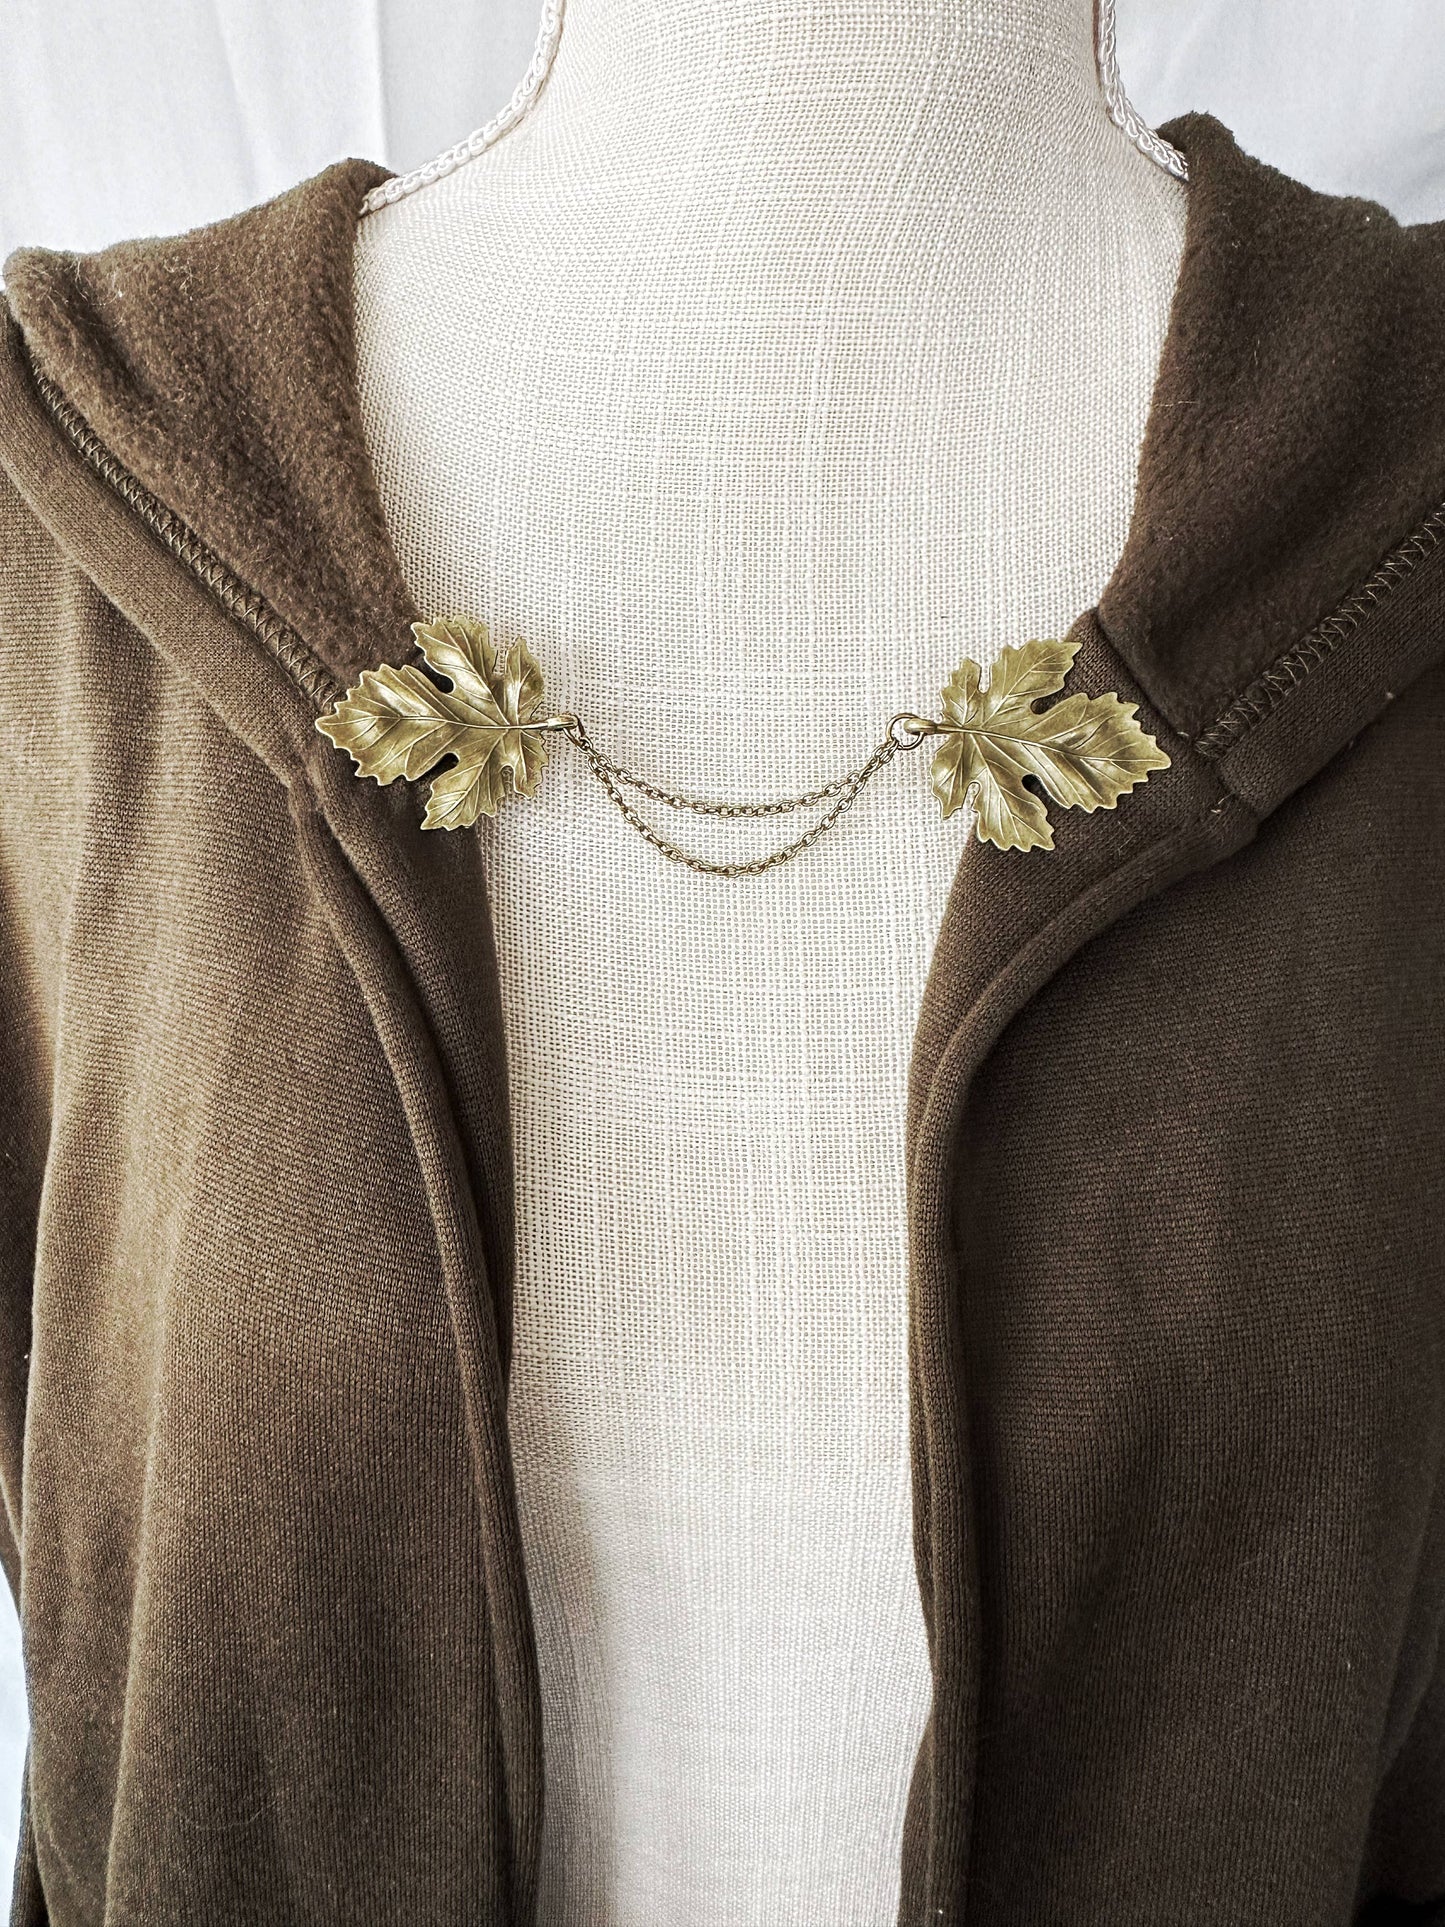 Cloak Clip - Bronze Metal Double Leaf Clasp with Chains